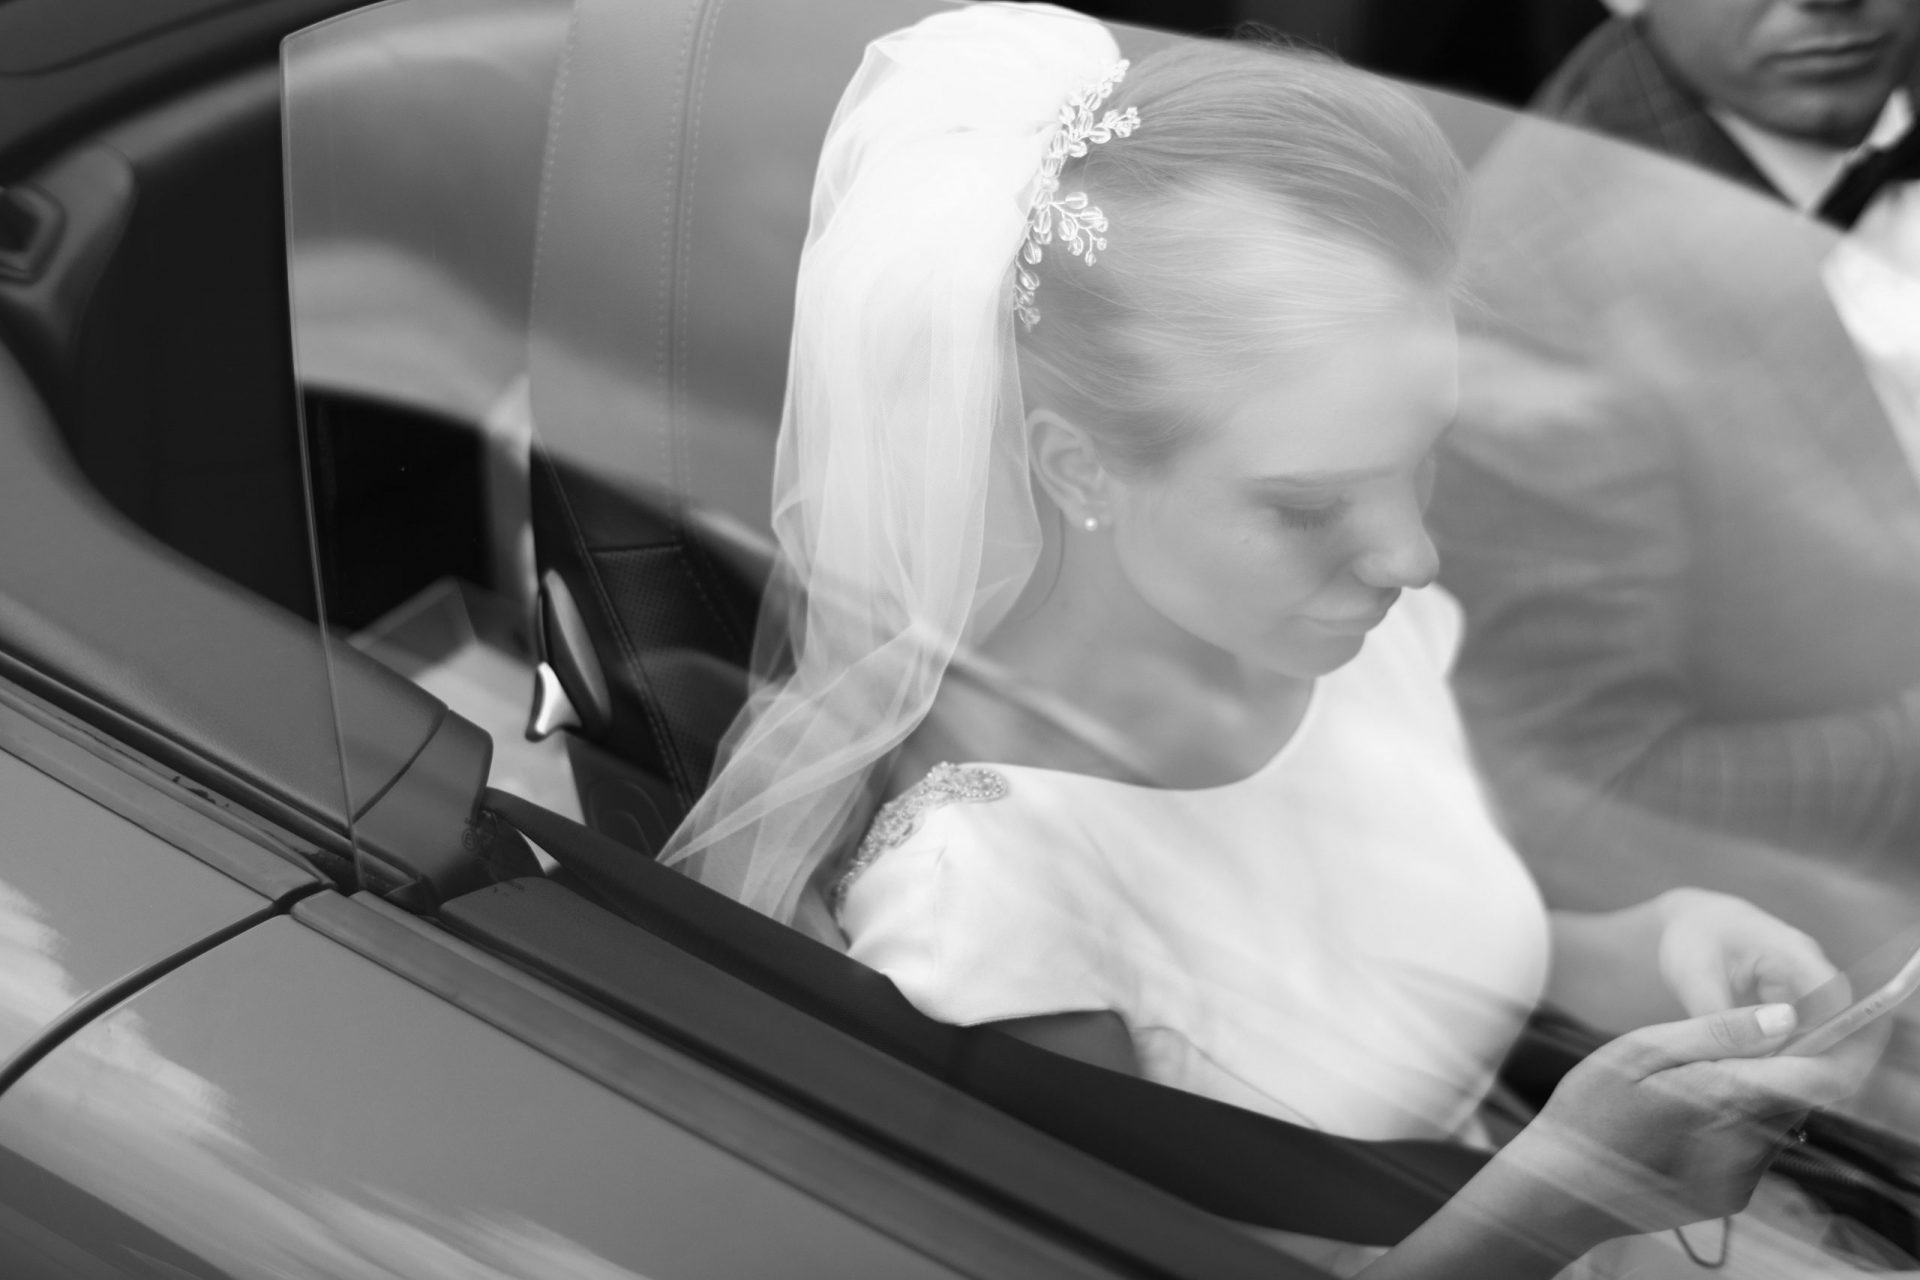 Wedding Transportation Services: A Checklist for Brides and Grooms